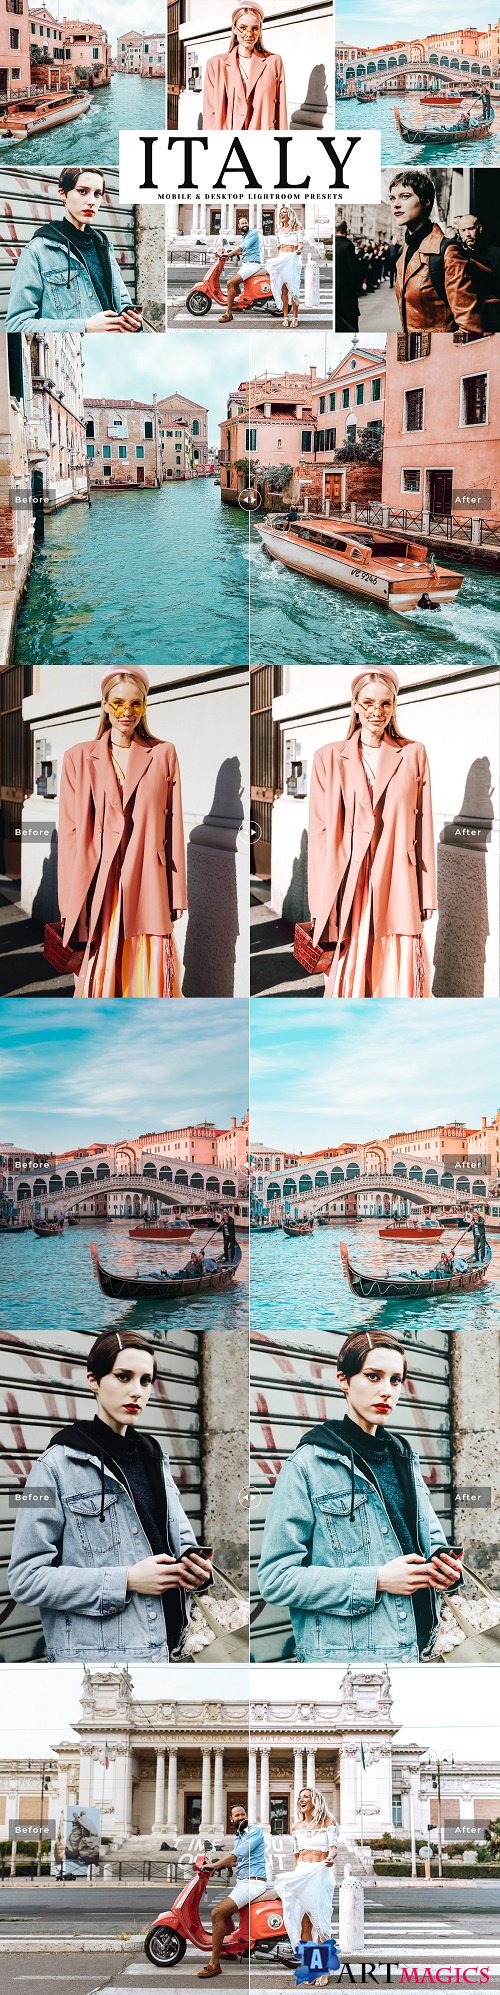 Italy Lightroom Presets Pack - 3884432